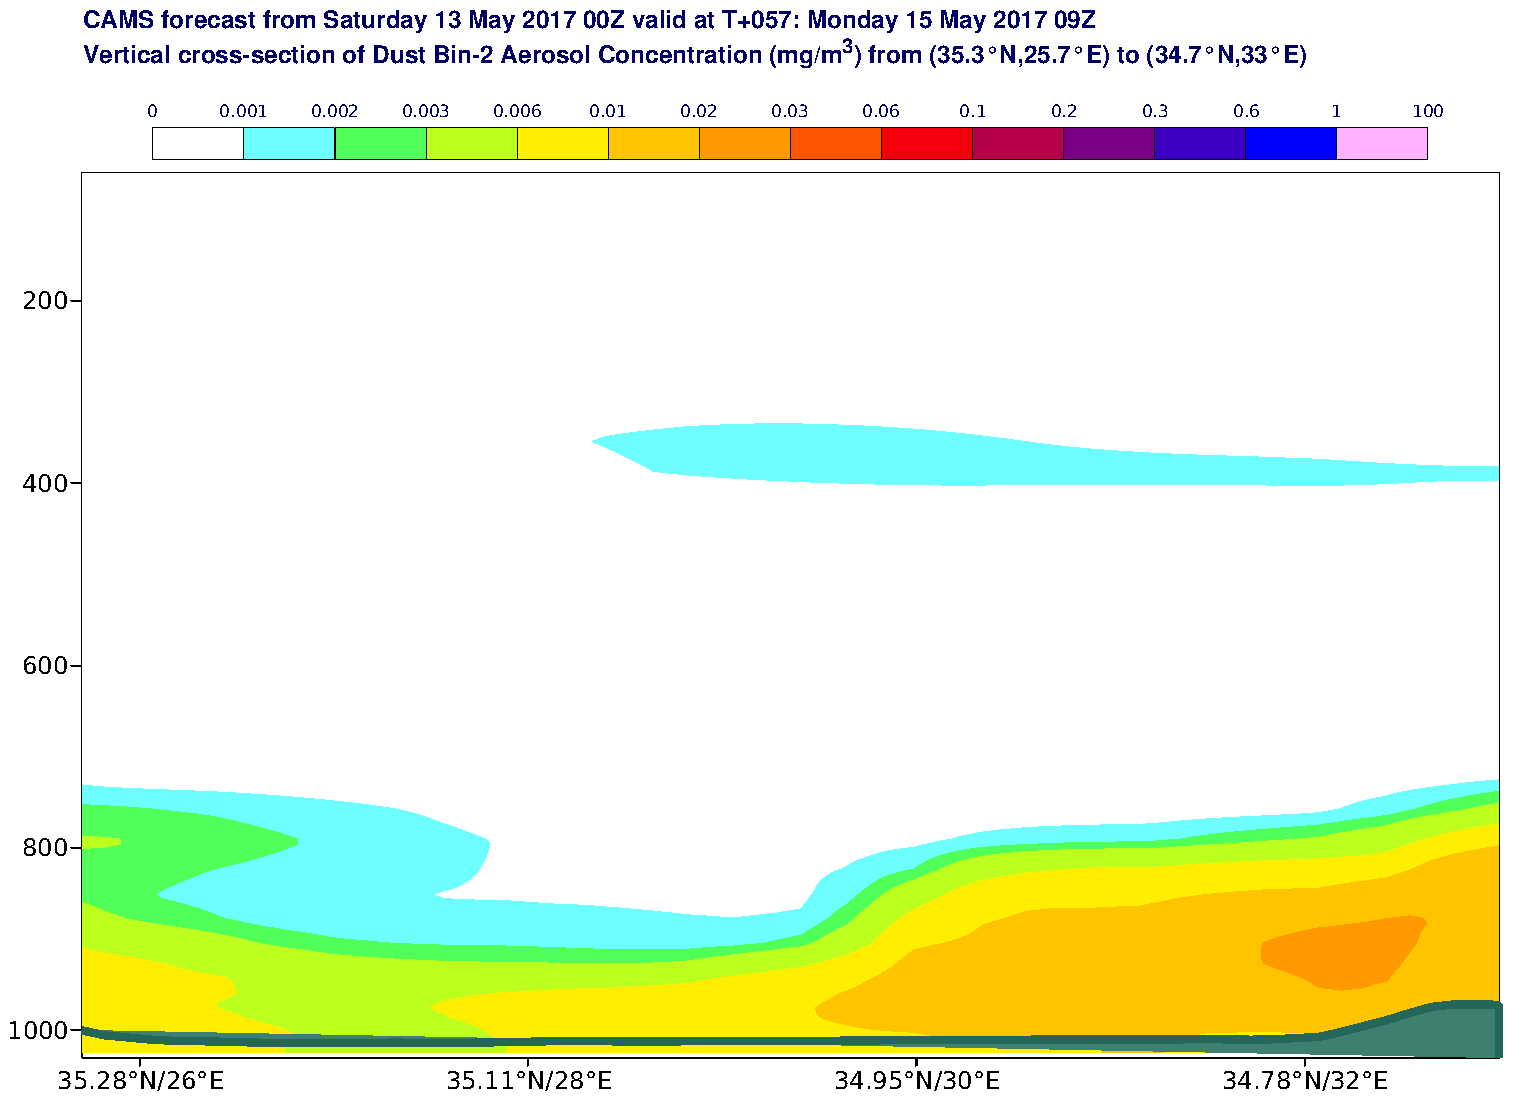 Vertical cross-section of Dust Bin-2 Aerosol Concentration (mg/m3) valid at T57 - 2017-05-15 09:00